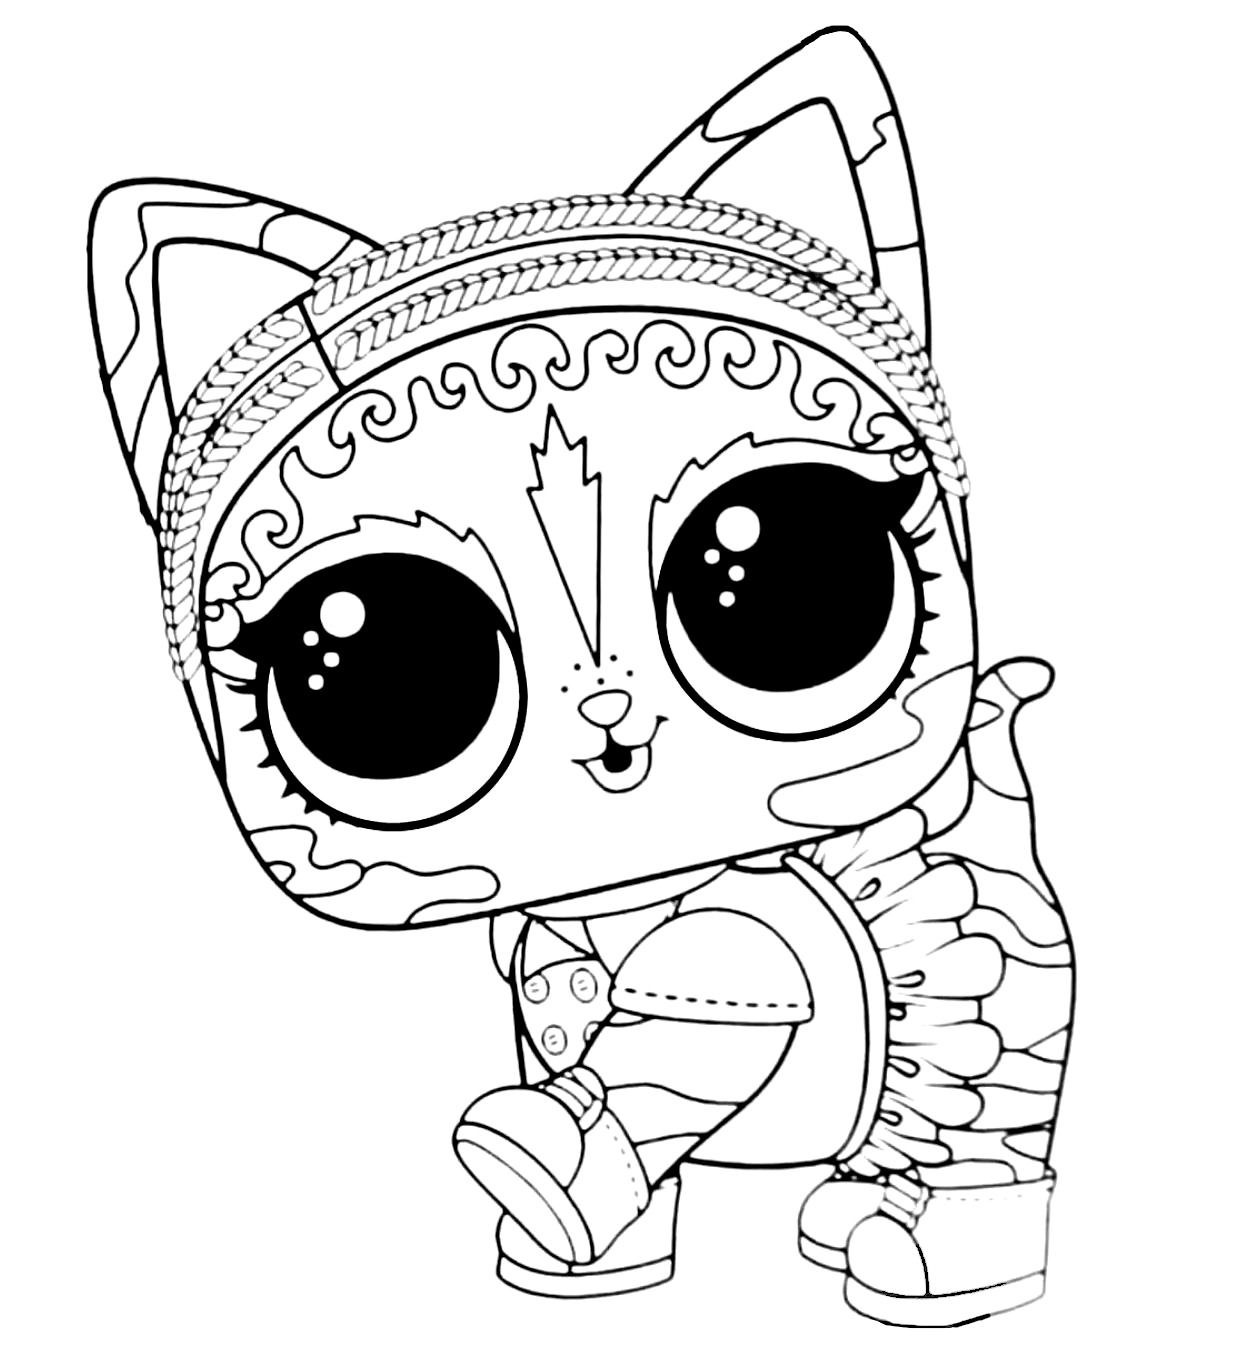 lol-animal-coloring-pages